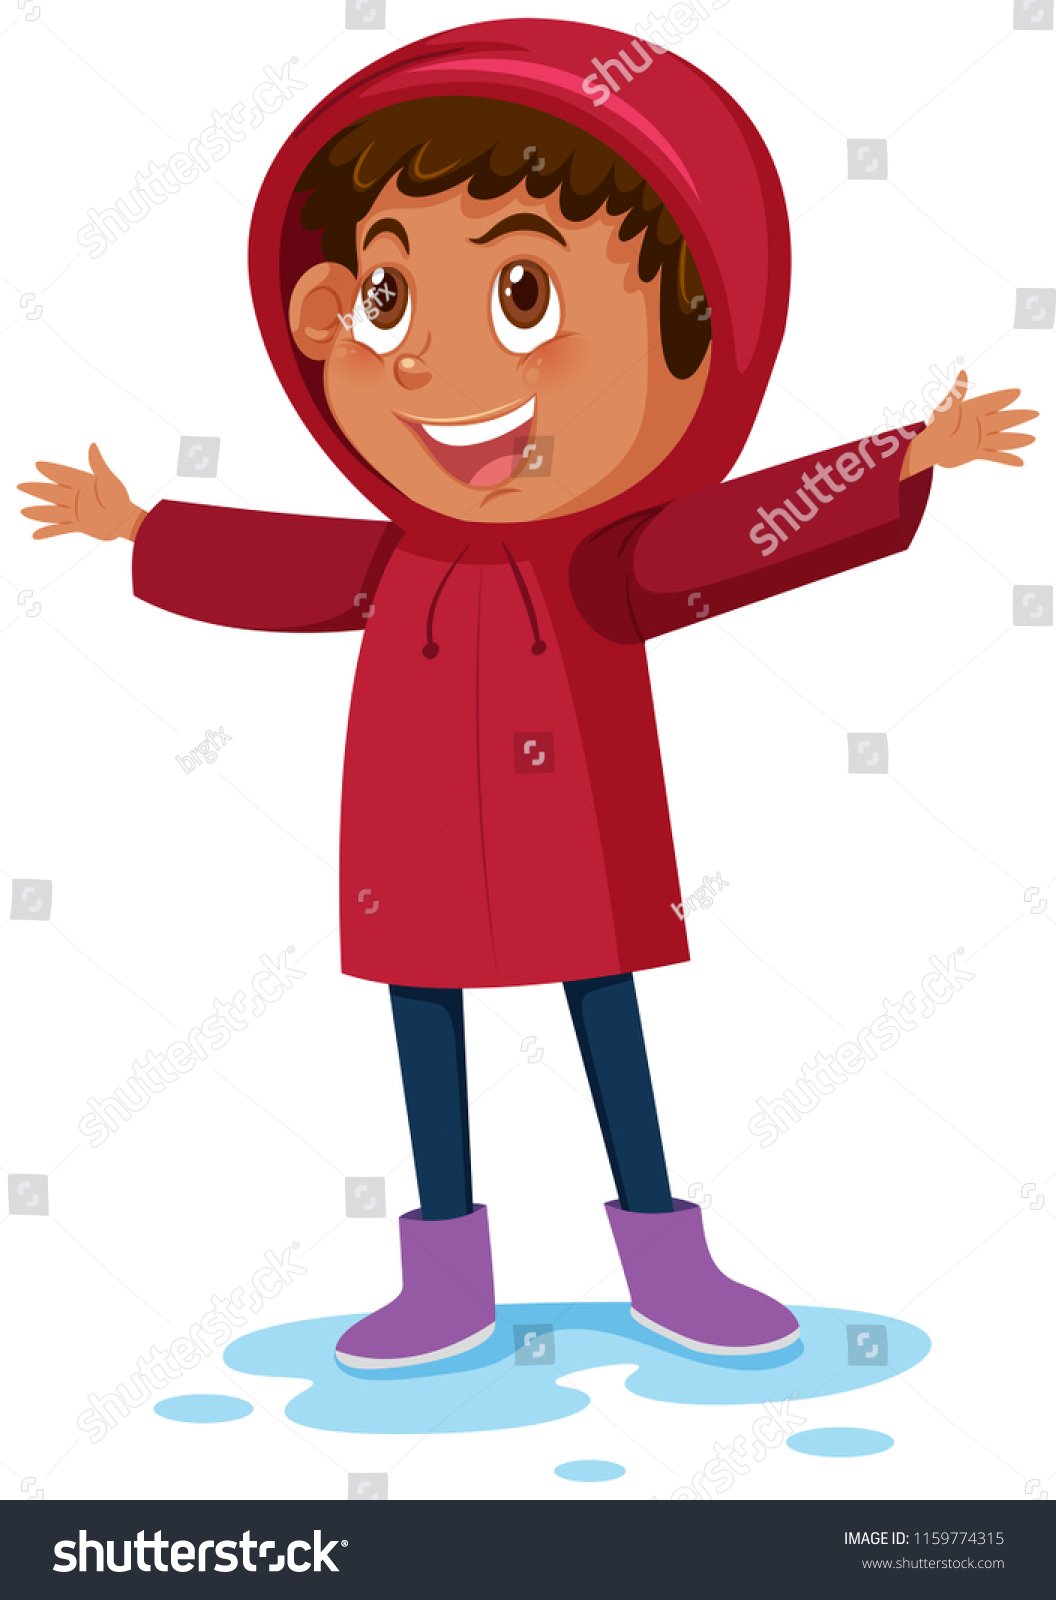 Young Boy Wearing Raincoat Illustration Stock Vector (Royalty Free ...